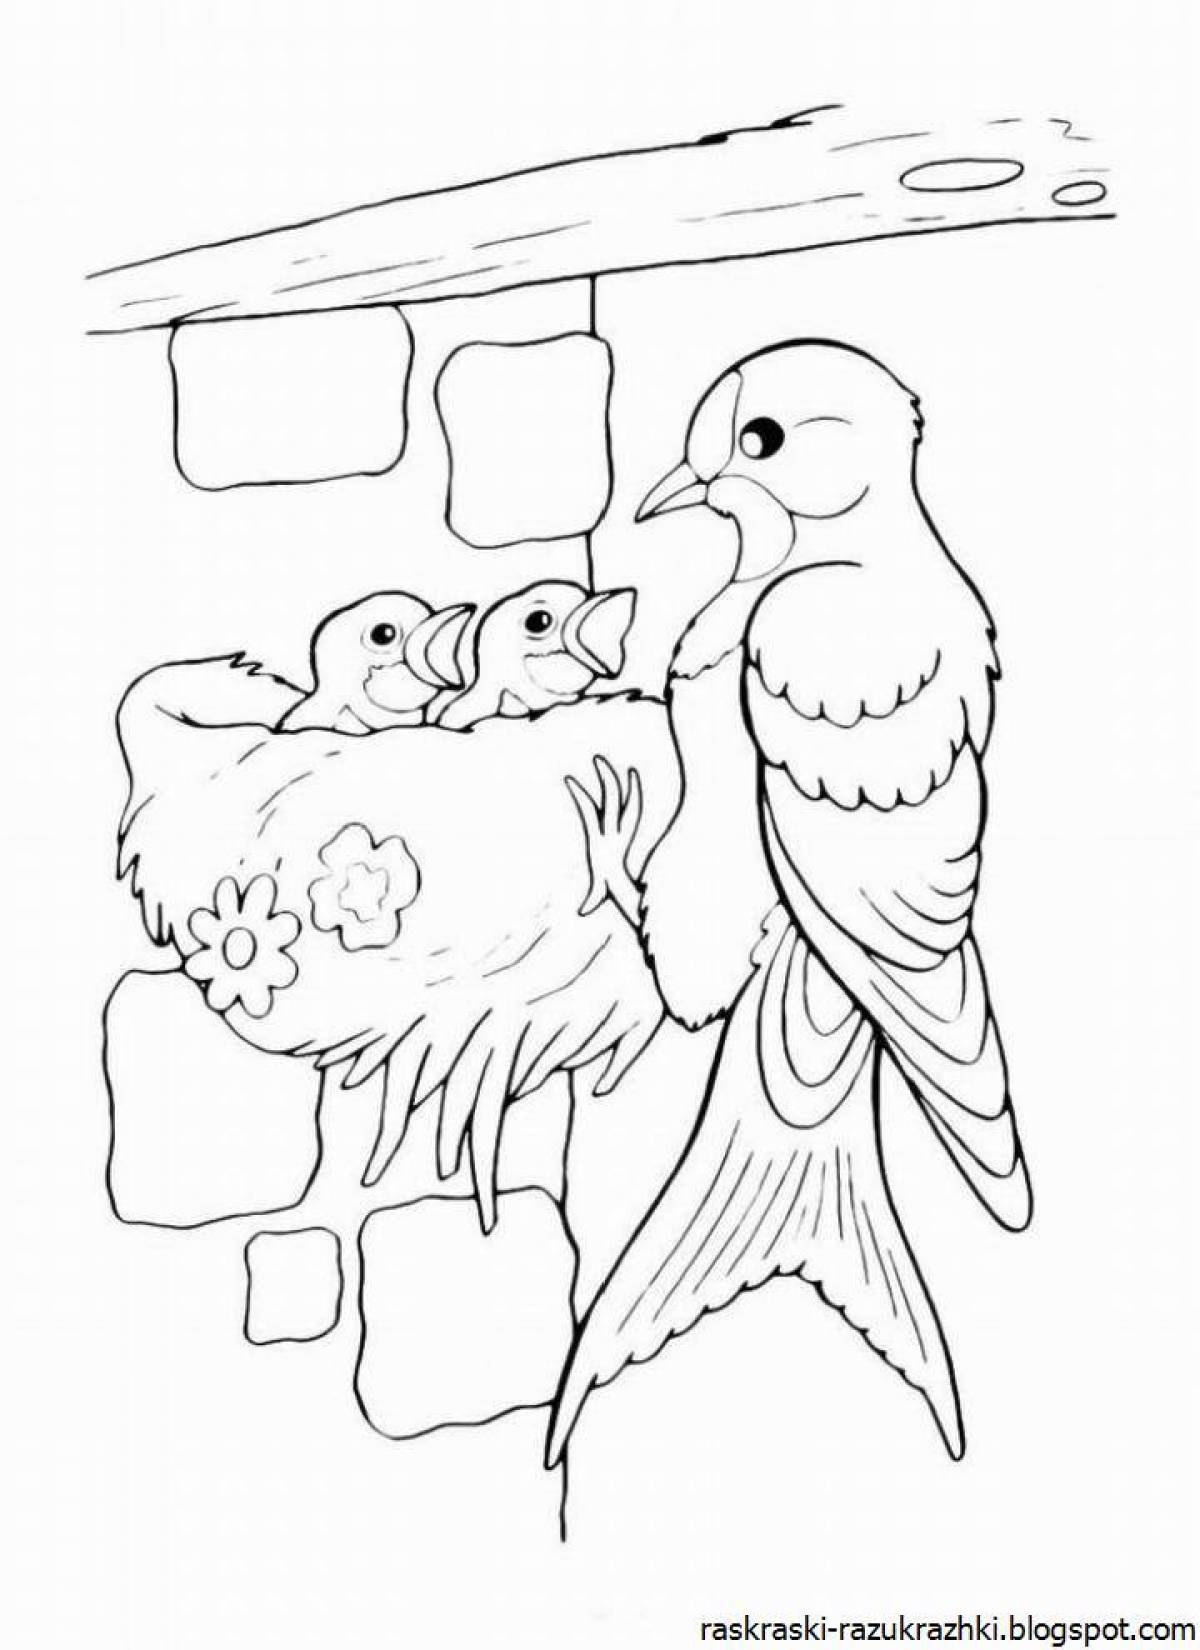 Cute bird coloring book for 6-7 year olds